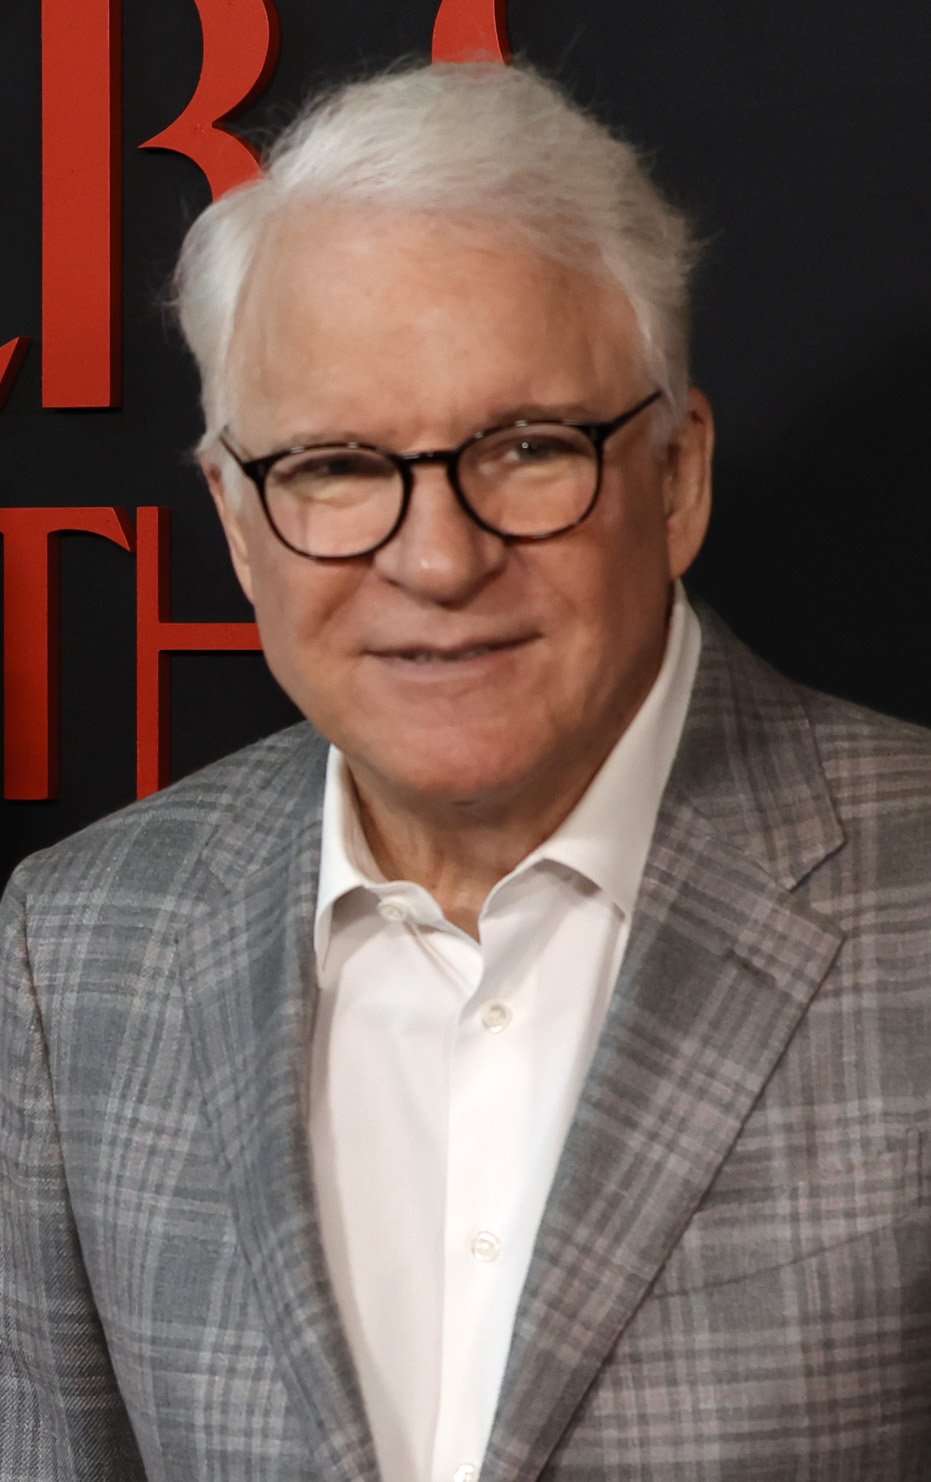  Steve Martin attends Los Angeles Premiere Of "Only Murders In The Building" Season 2 on June 27, 2022, in Los Angeles, California. | Source: Getty Images